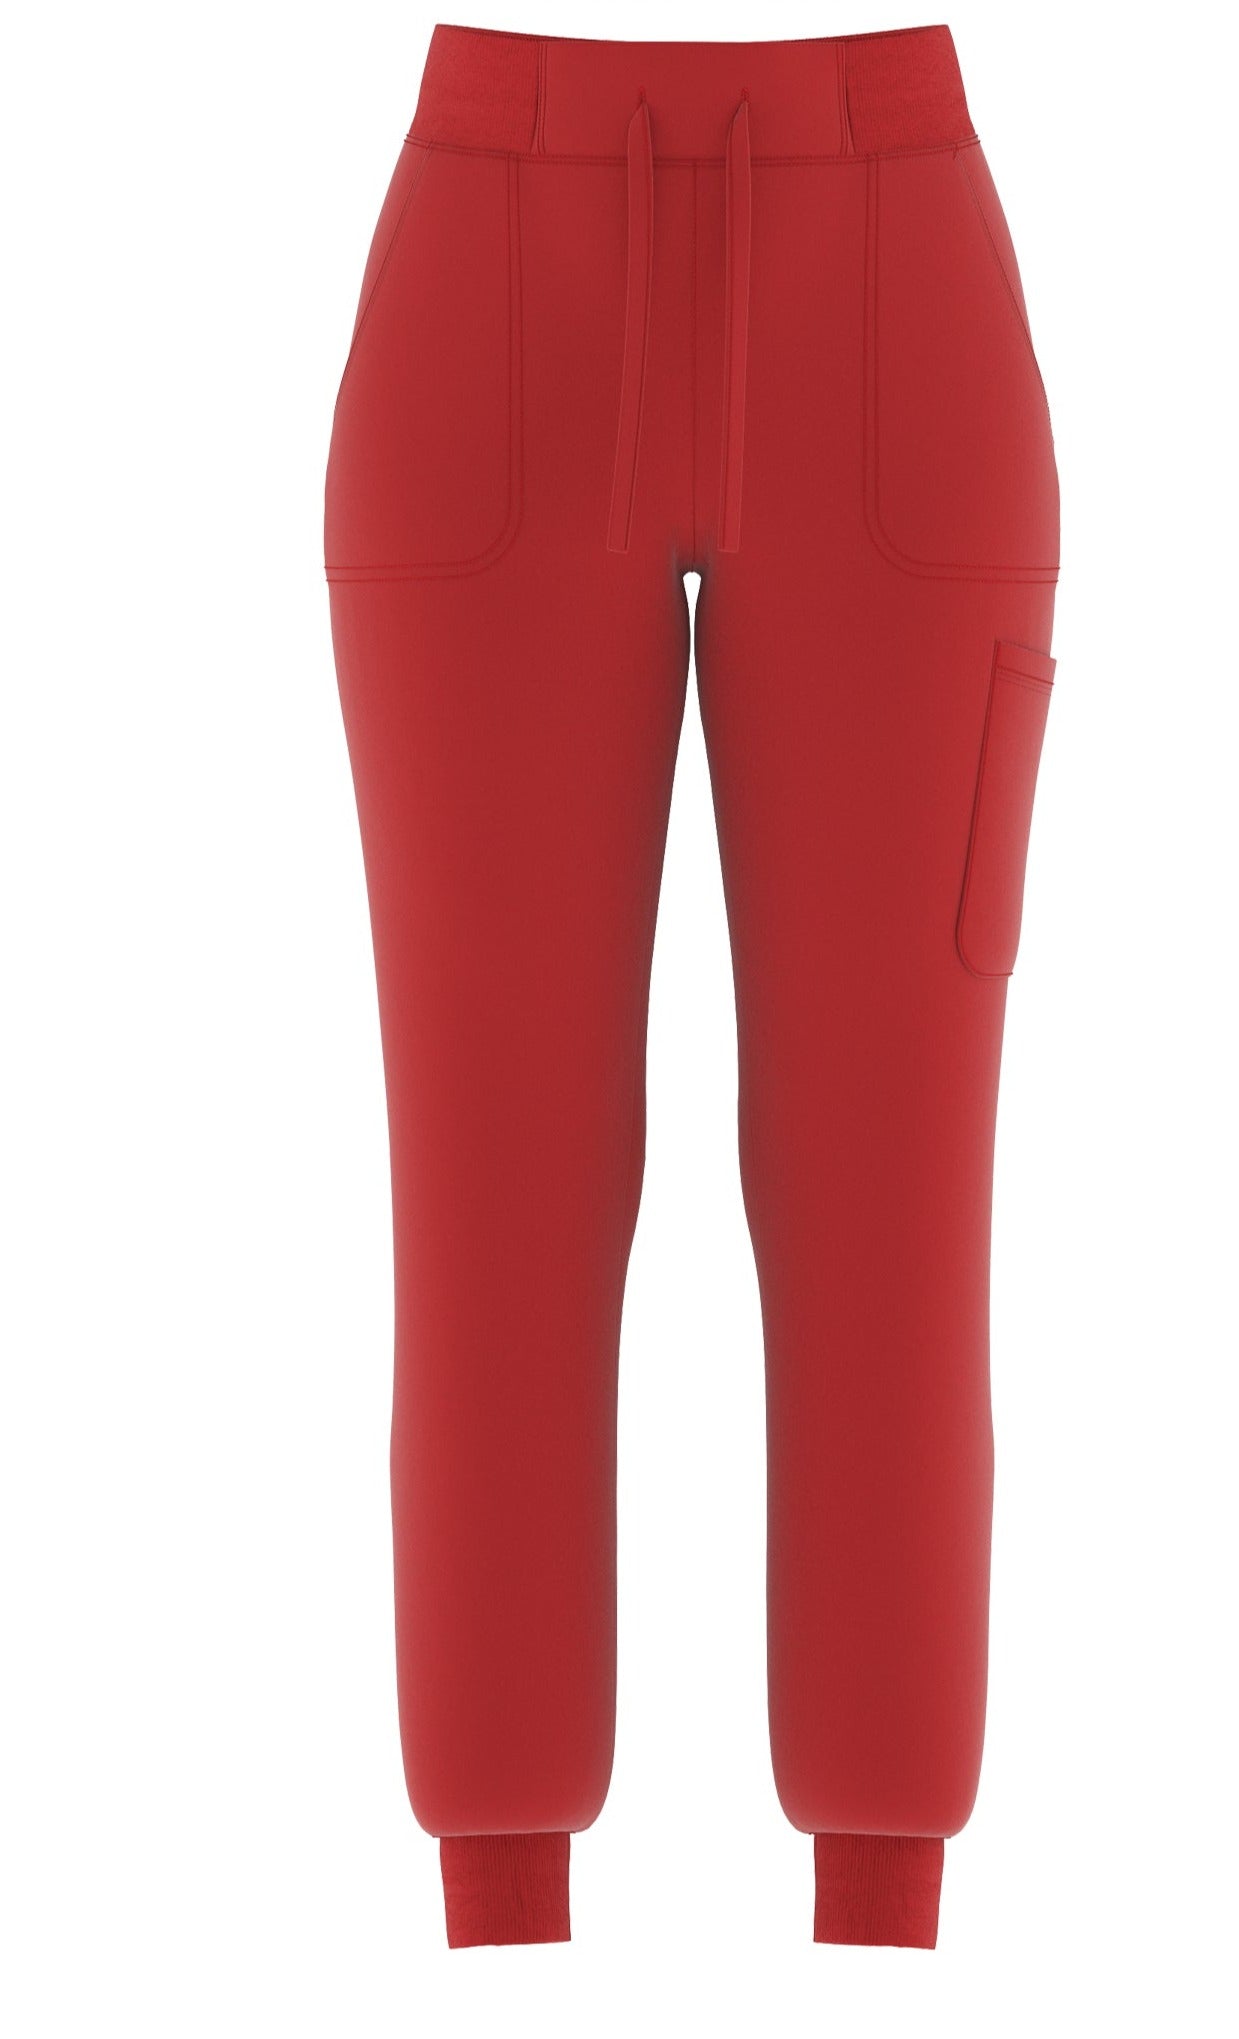 Beverly Hills Red Stretch Jogger Pant - Women's